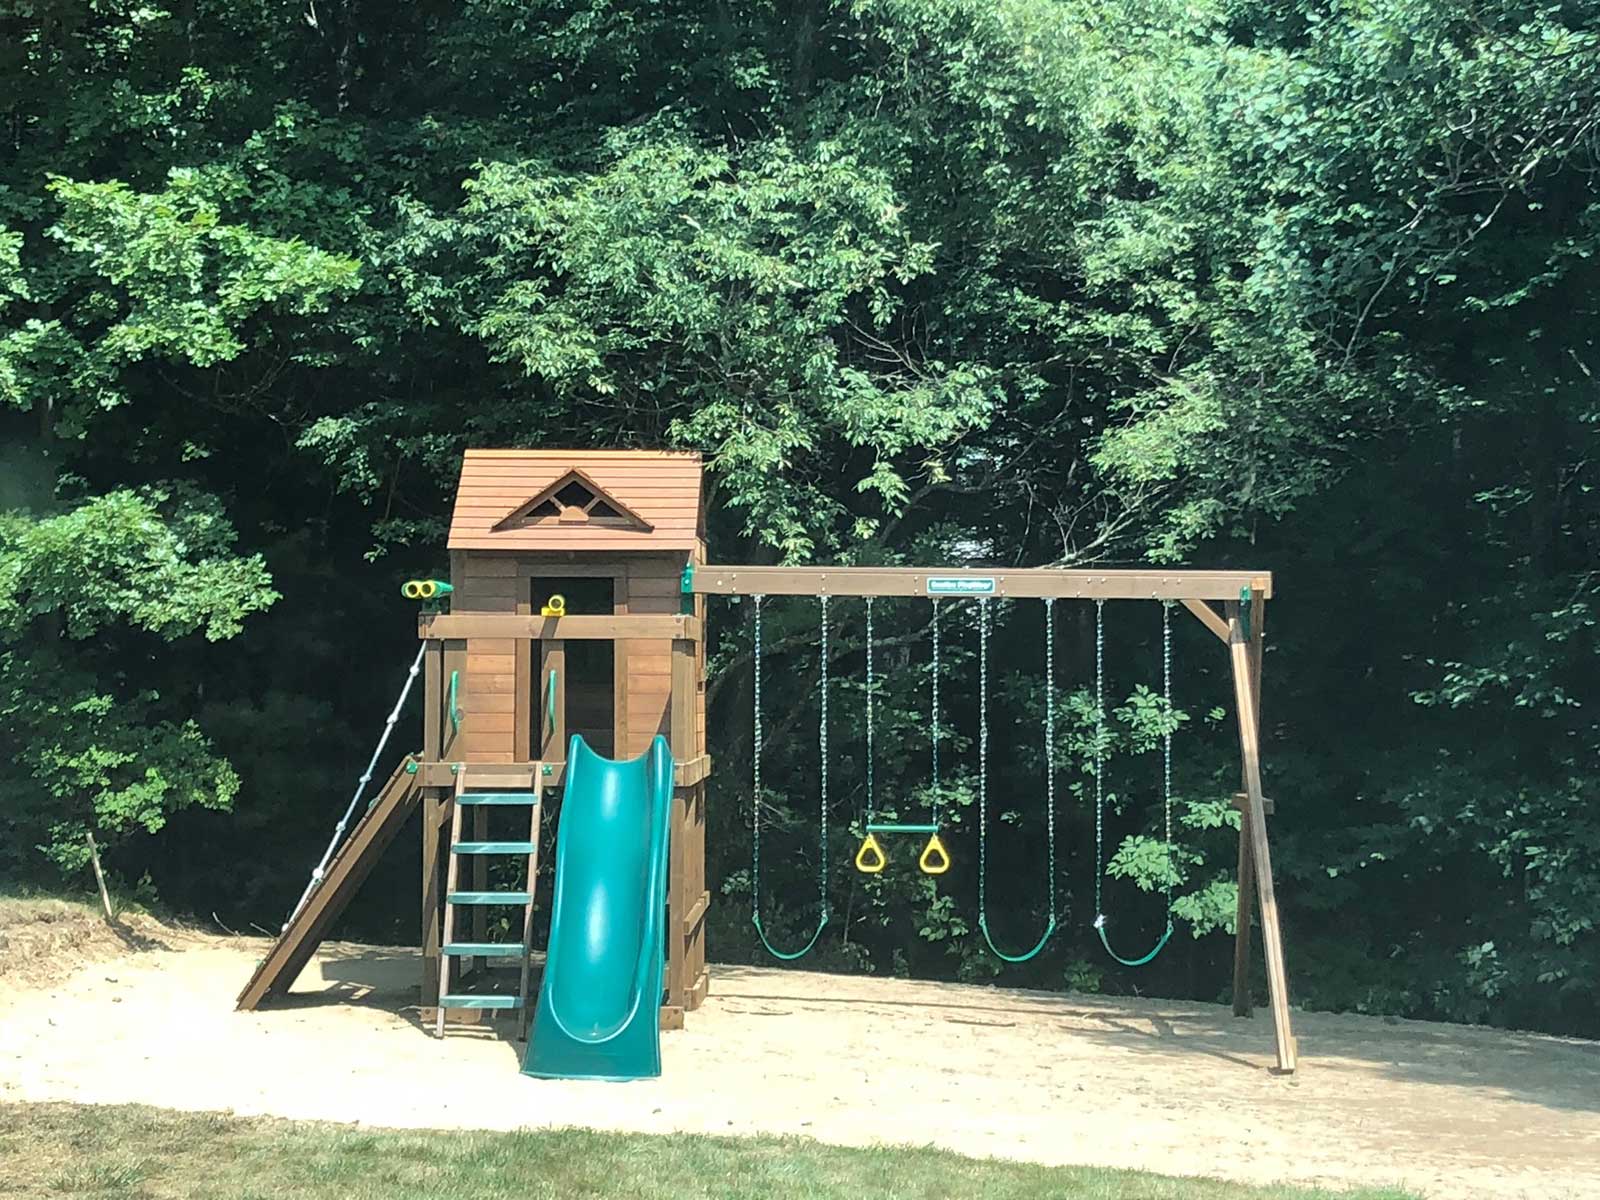 Customer image of a residential Creative Playthings swing set in a yard.